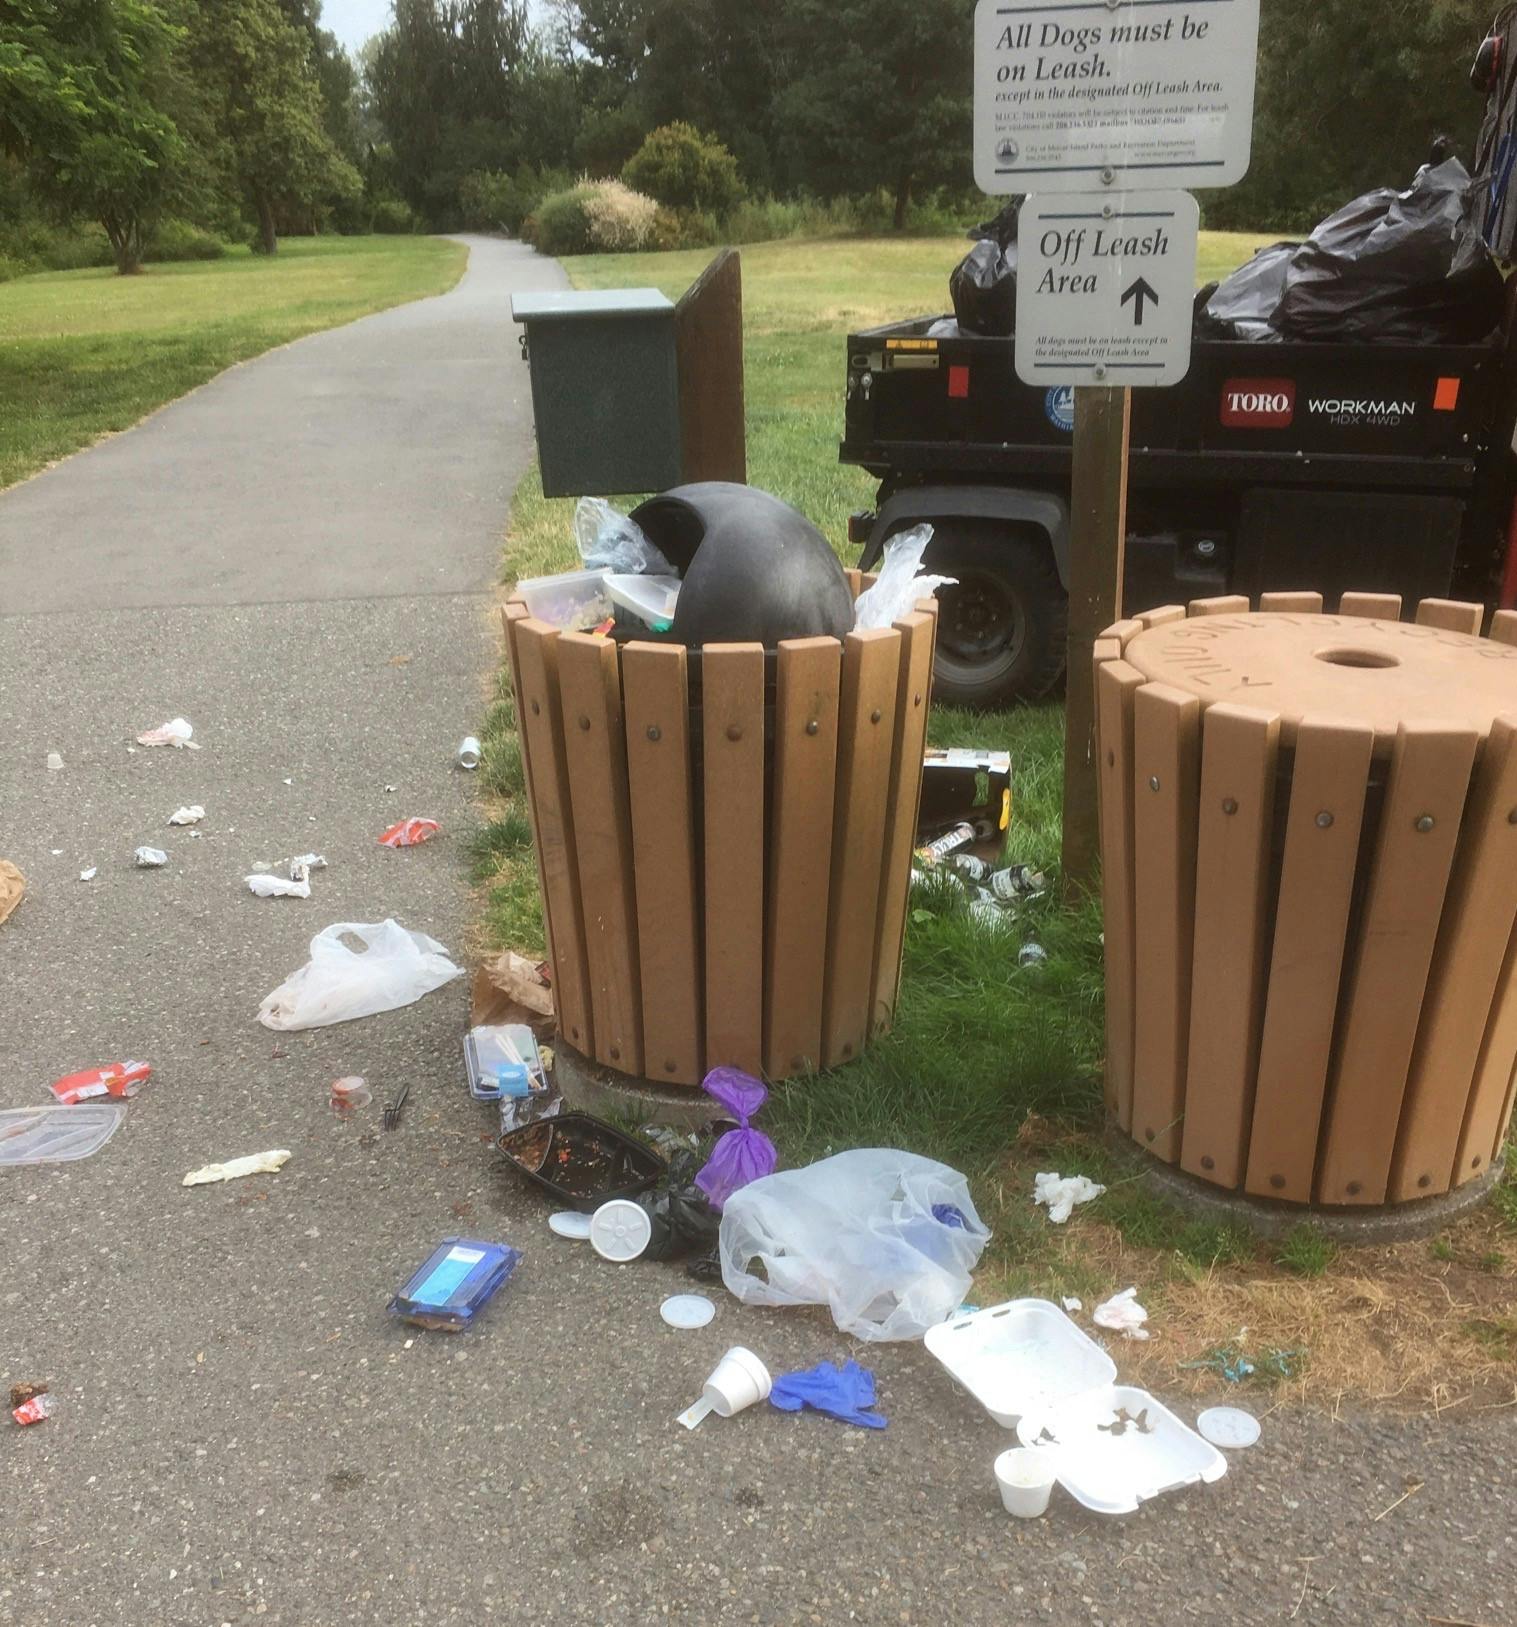 We Need Your Help! Please pack out your garbage!